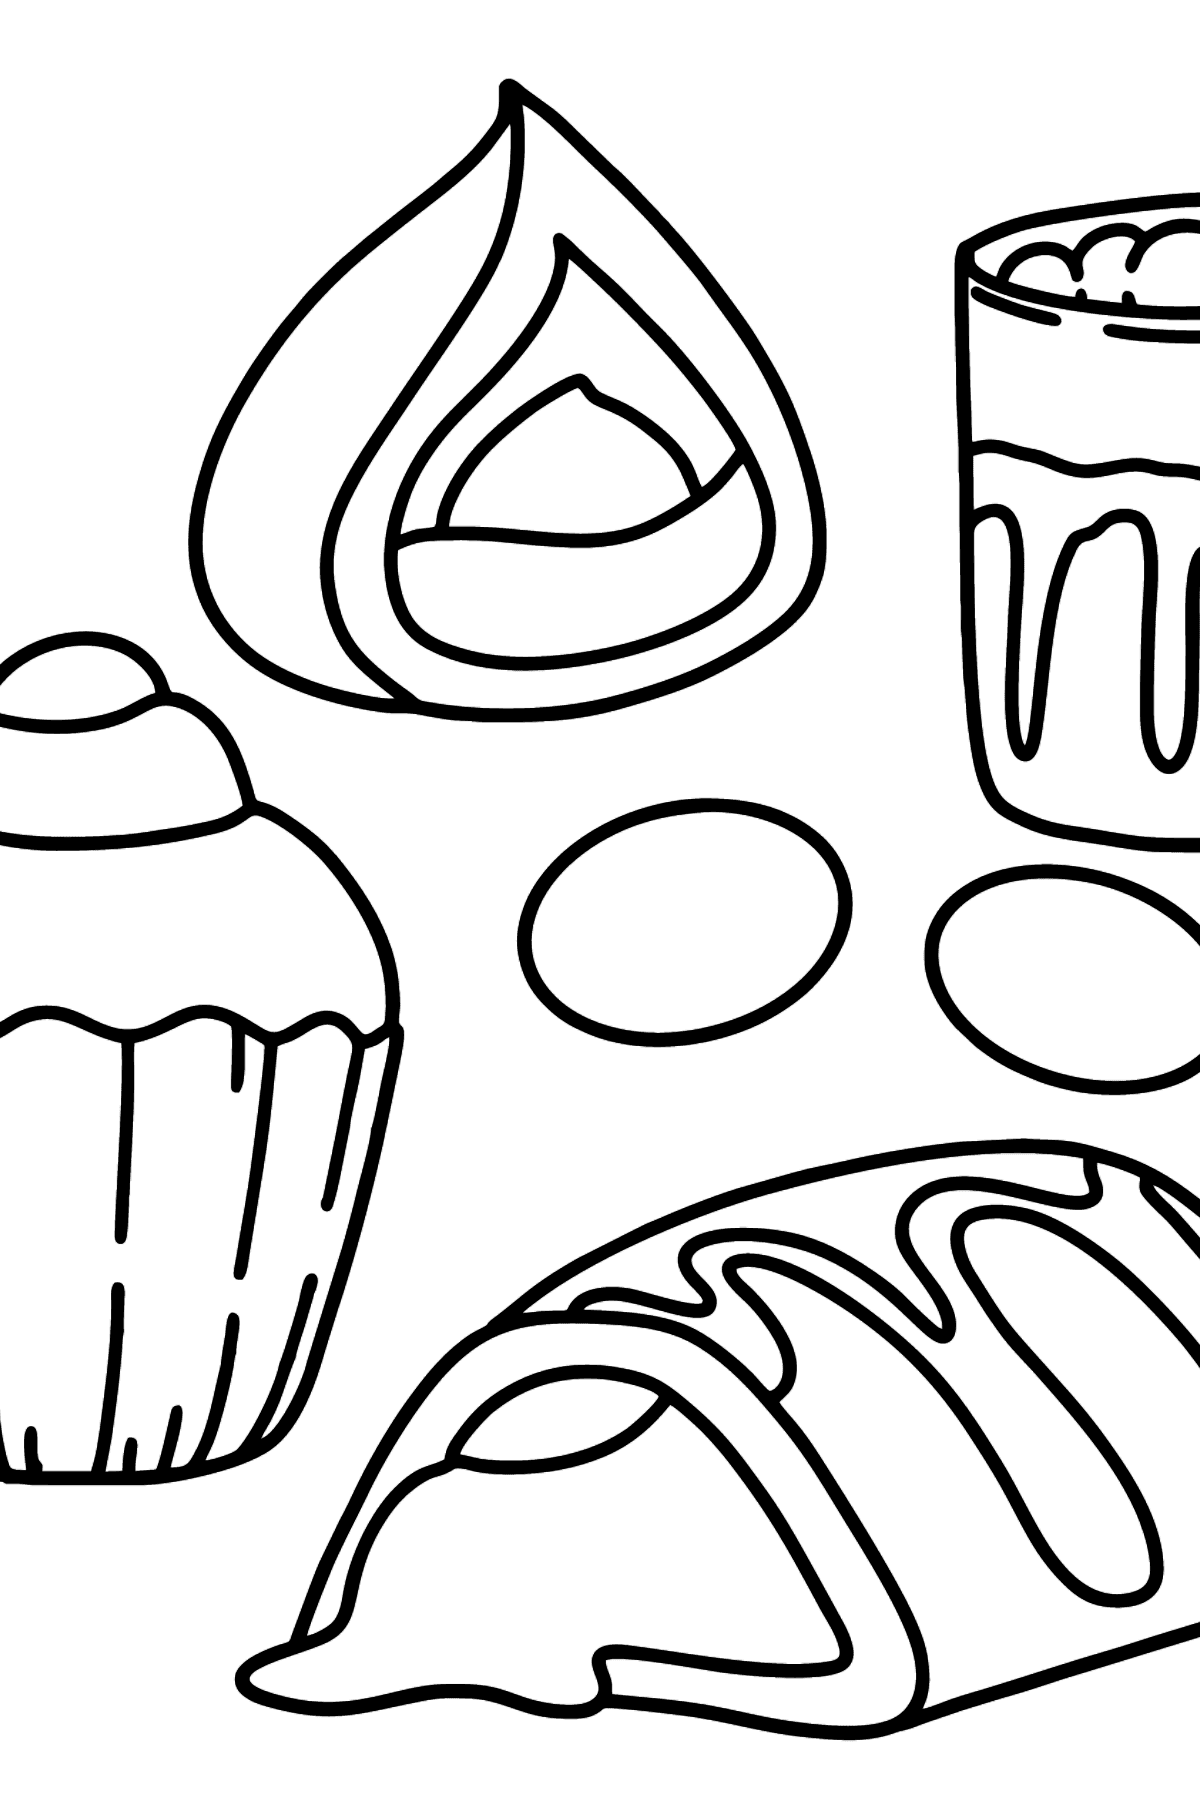 Yummy coloring page - Coloring Pages for Kids